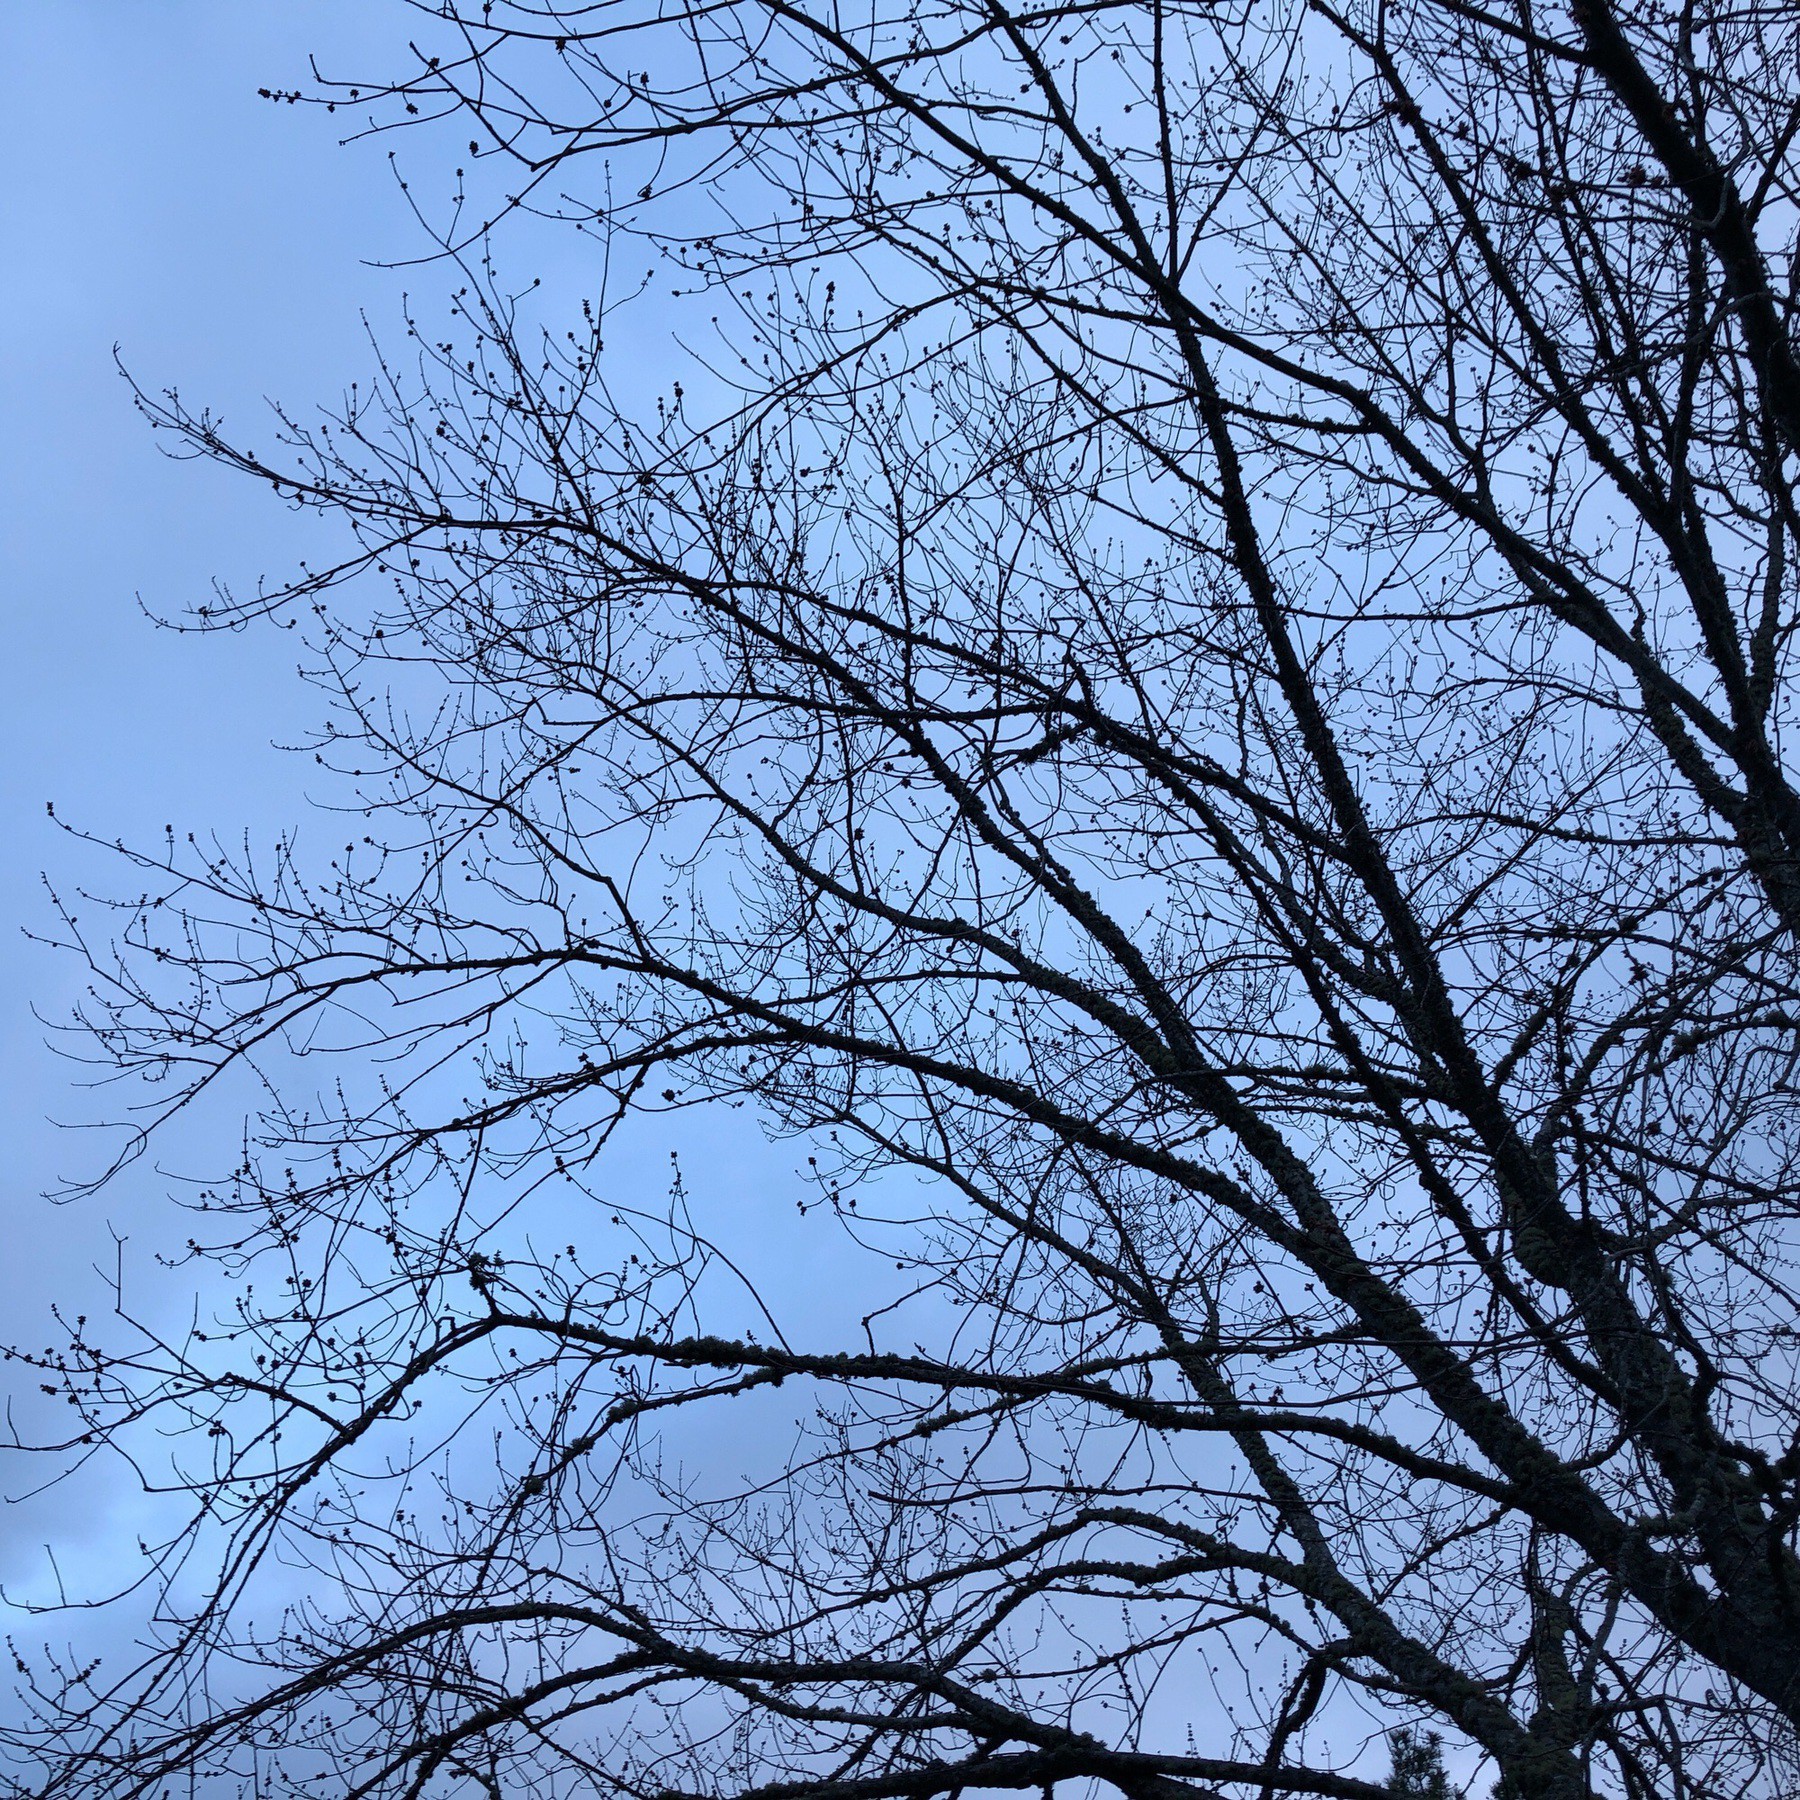 Sky and tree branches.